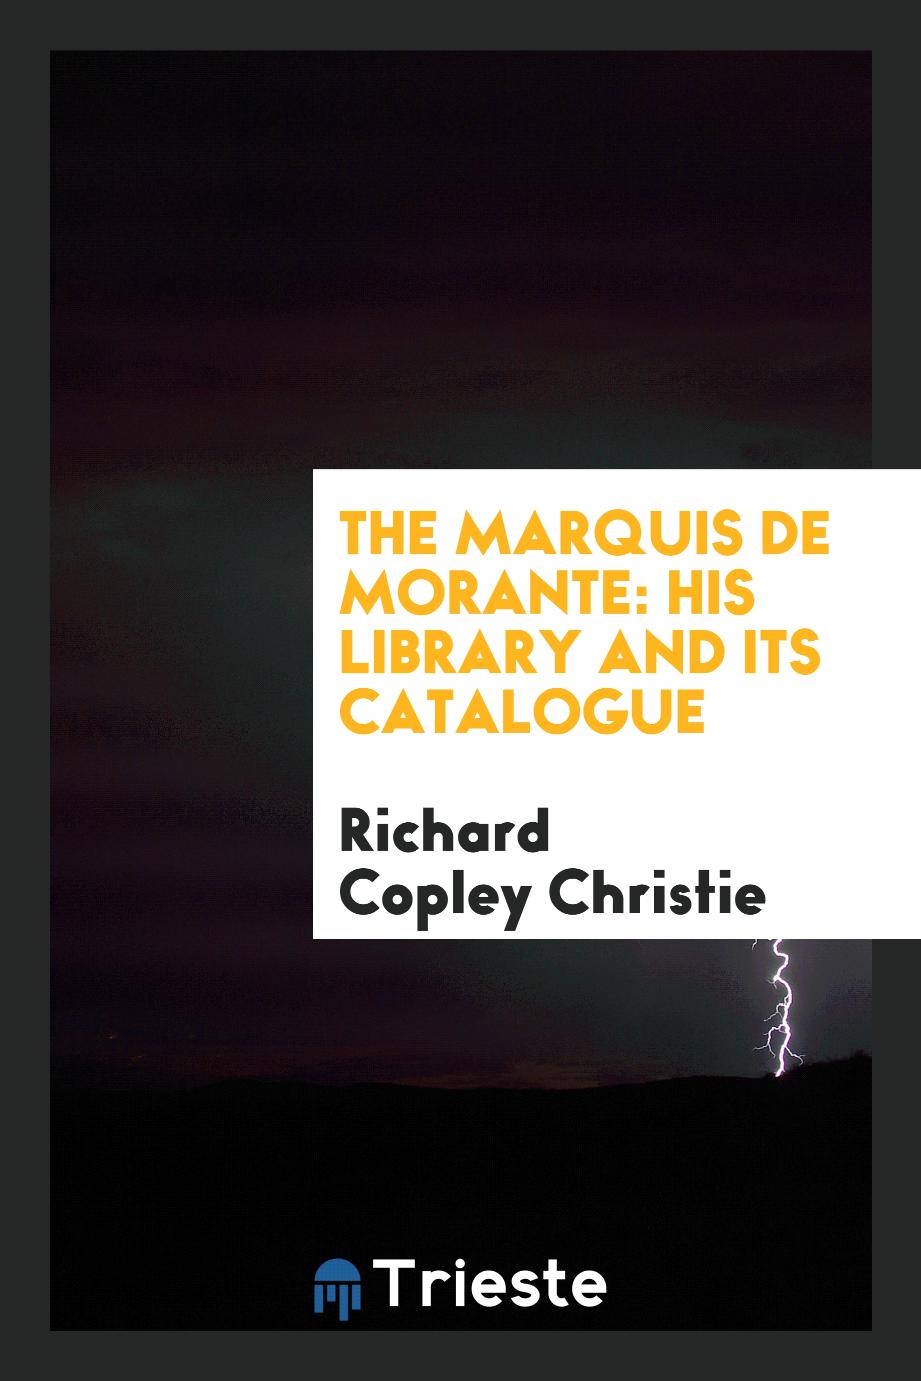 The marquis de Morante: his library and its catalogue